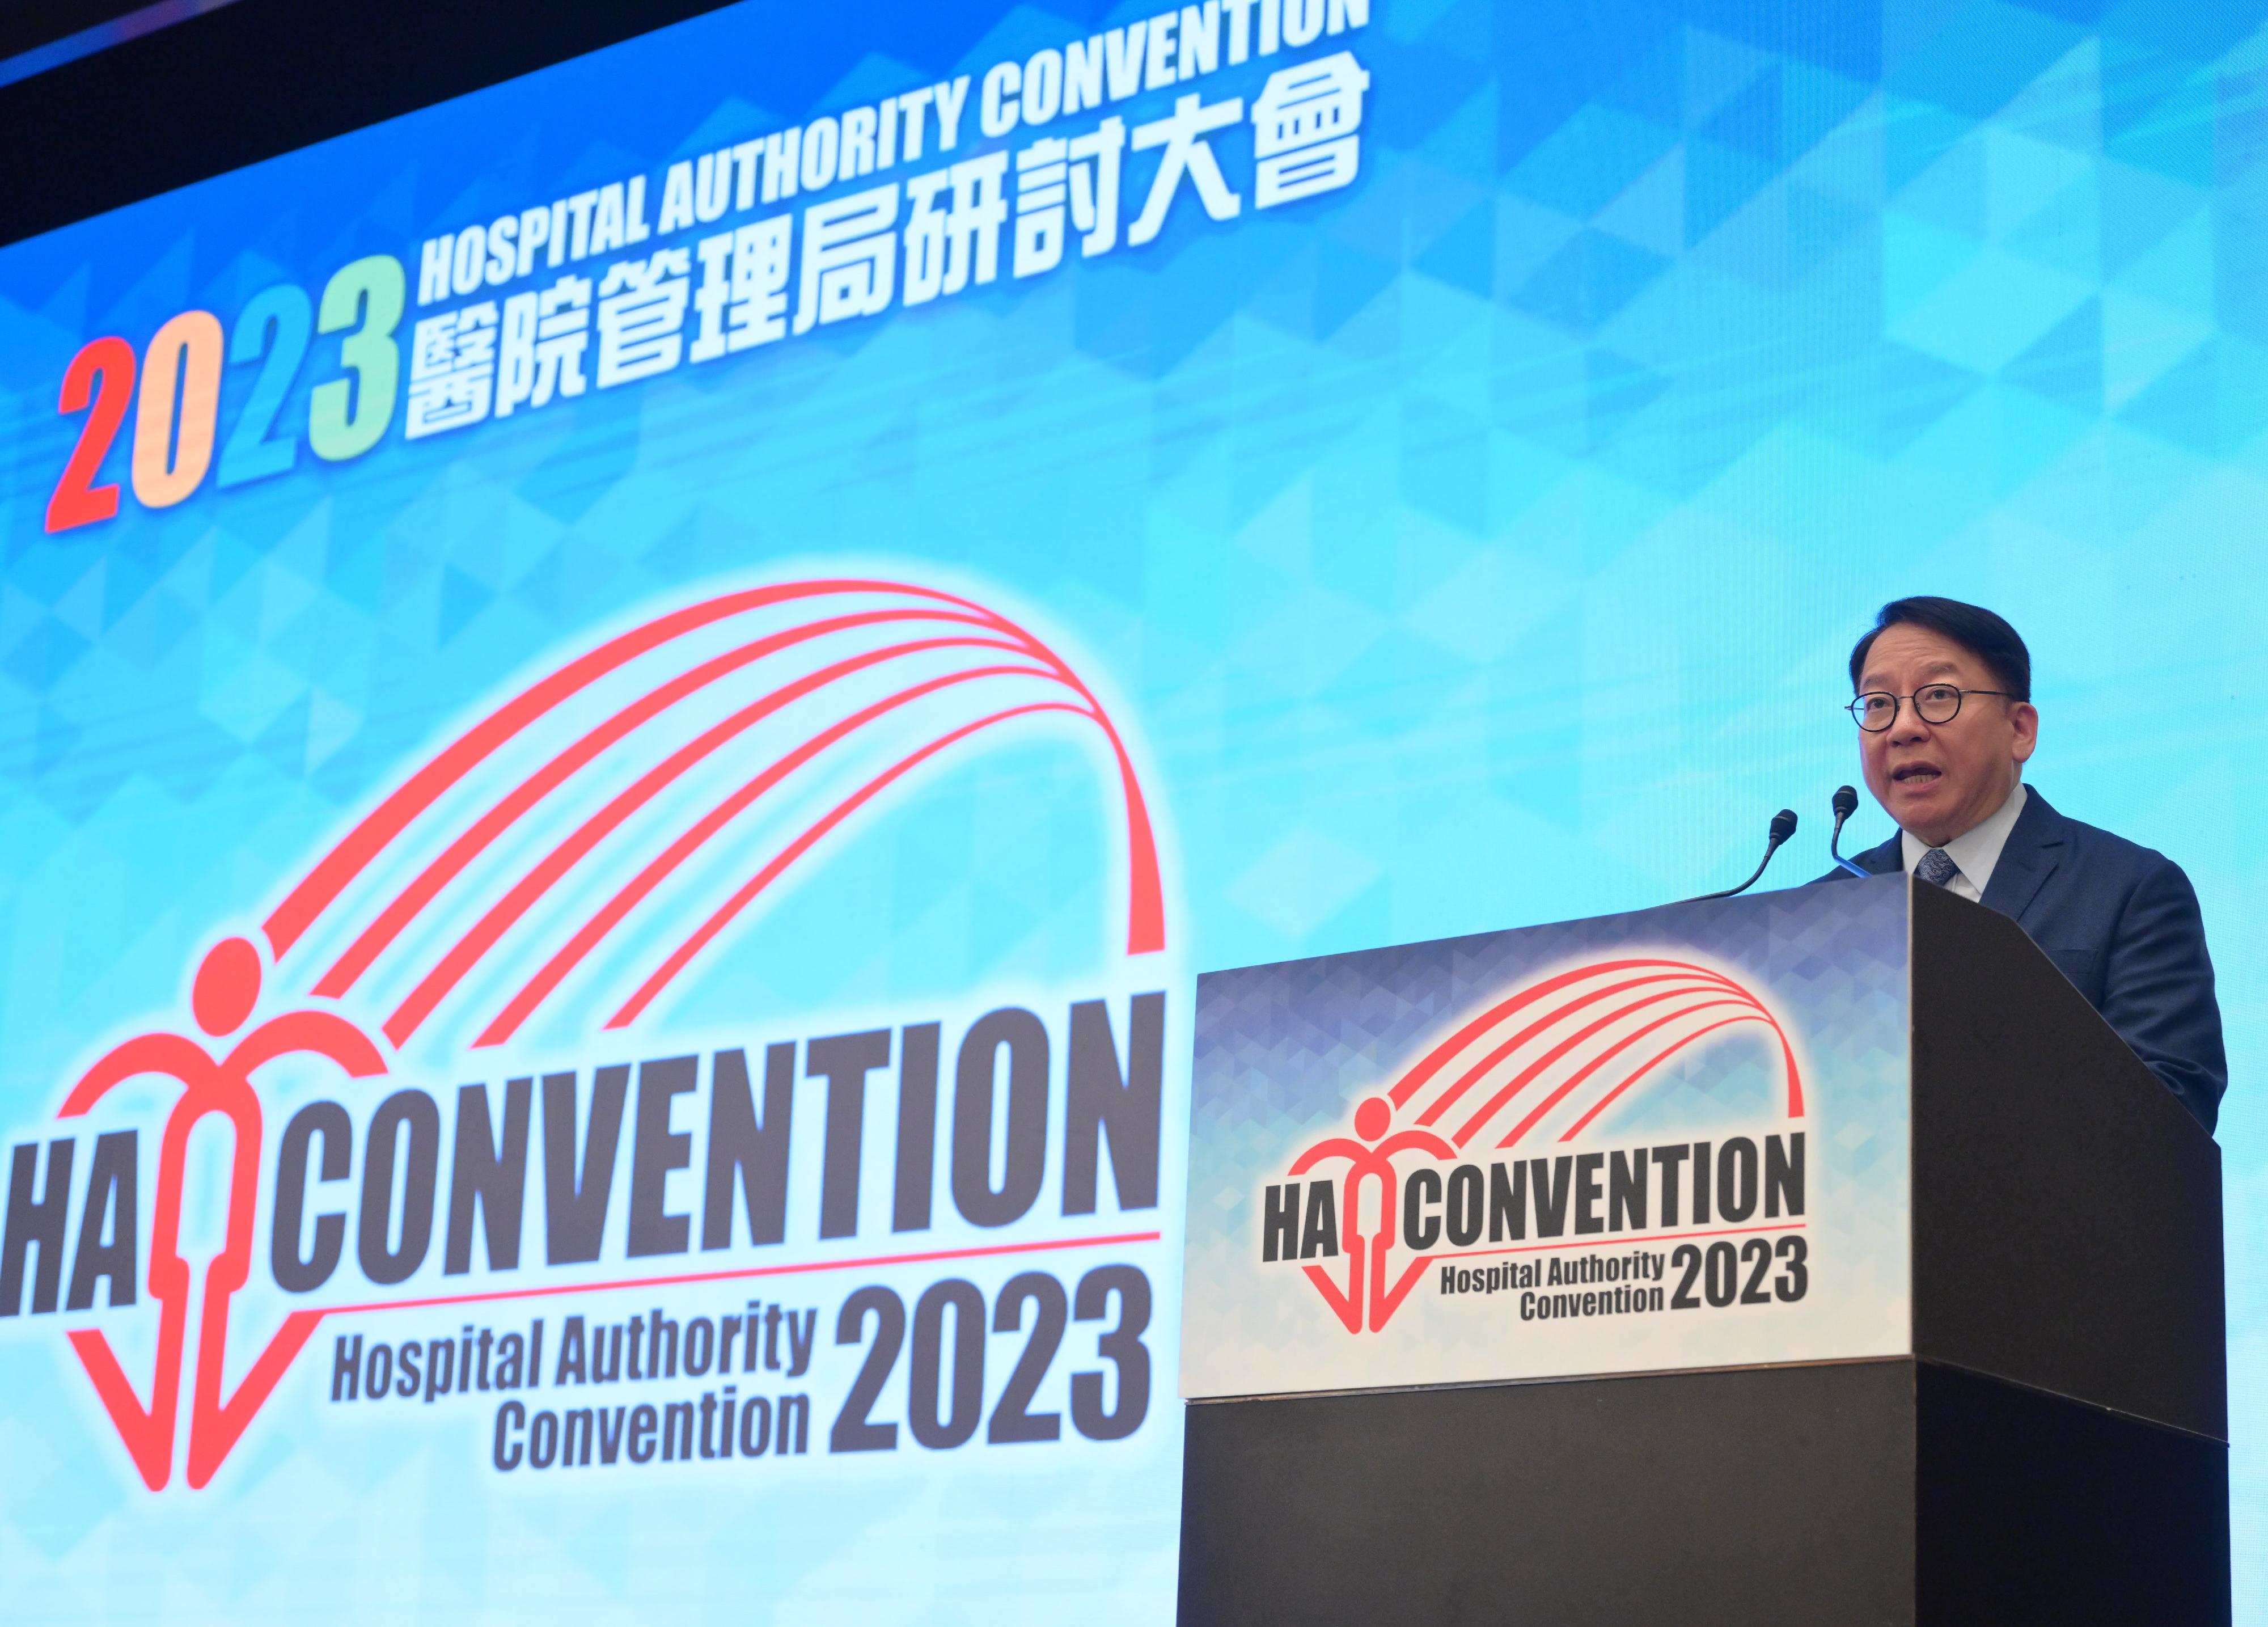 The Chief Secretary for Administration, Mr Chan Kwok-ki, speaks at the Opening Ceremony of the Hospital Authority Convention 2023 today (May 16).